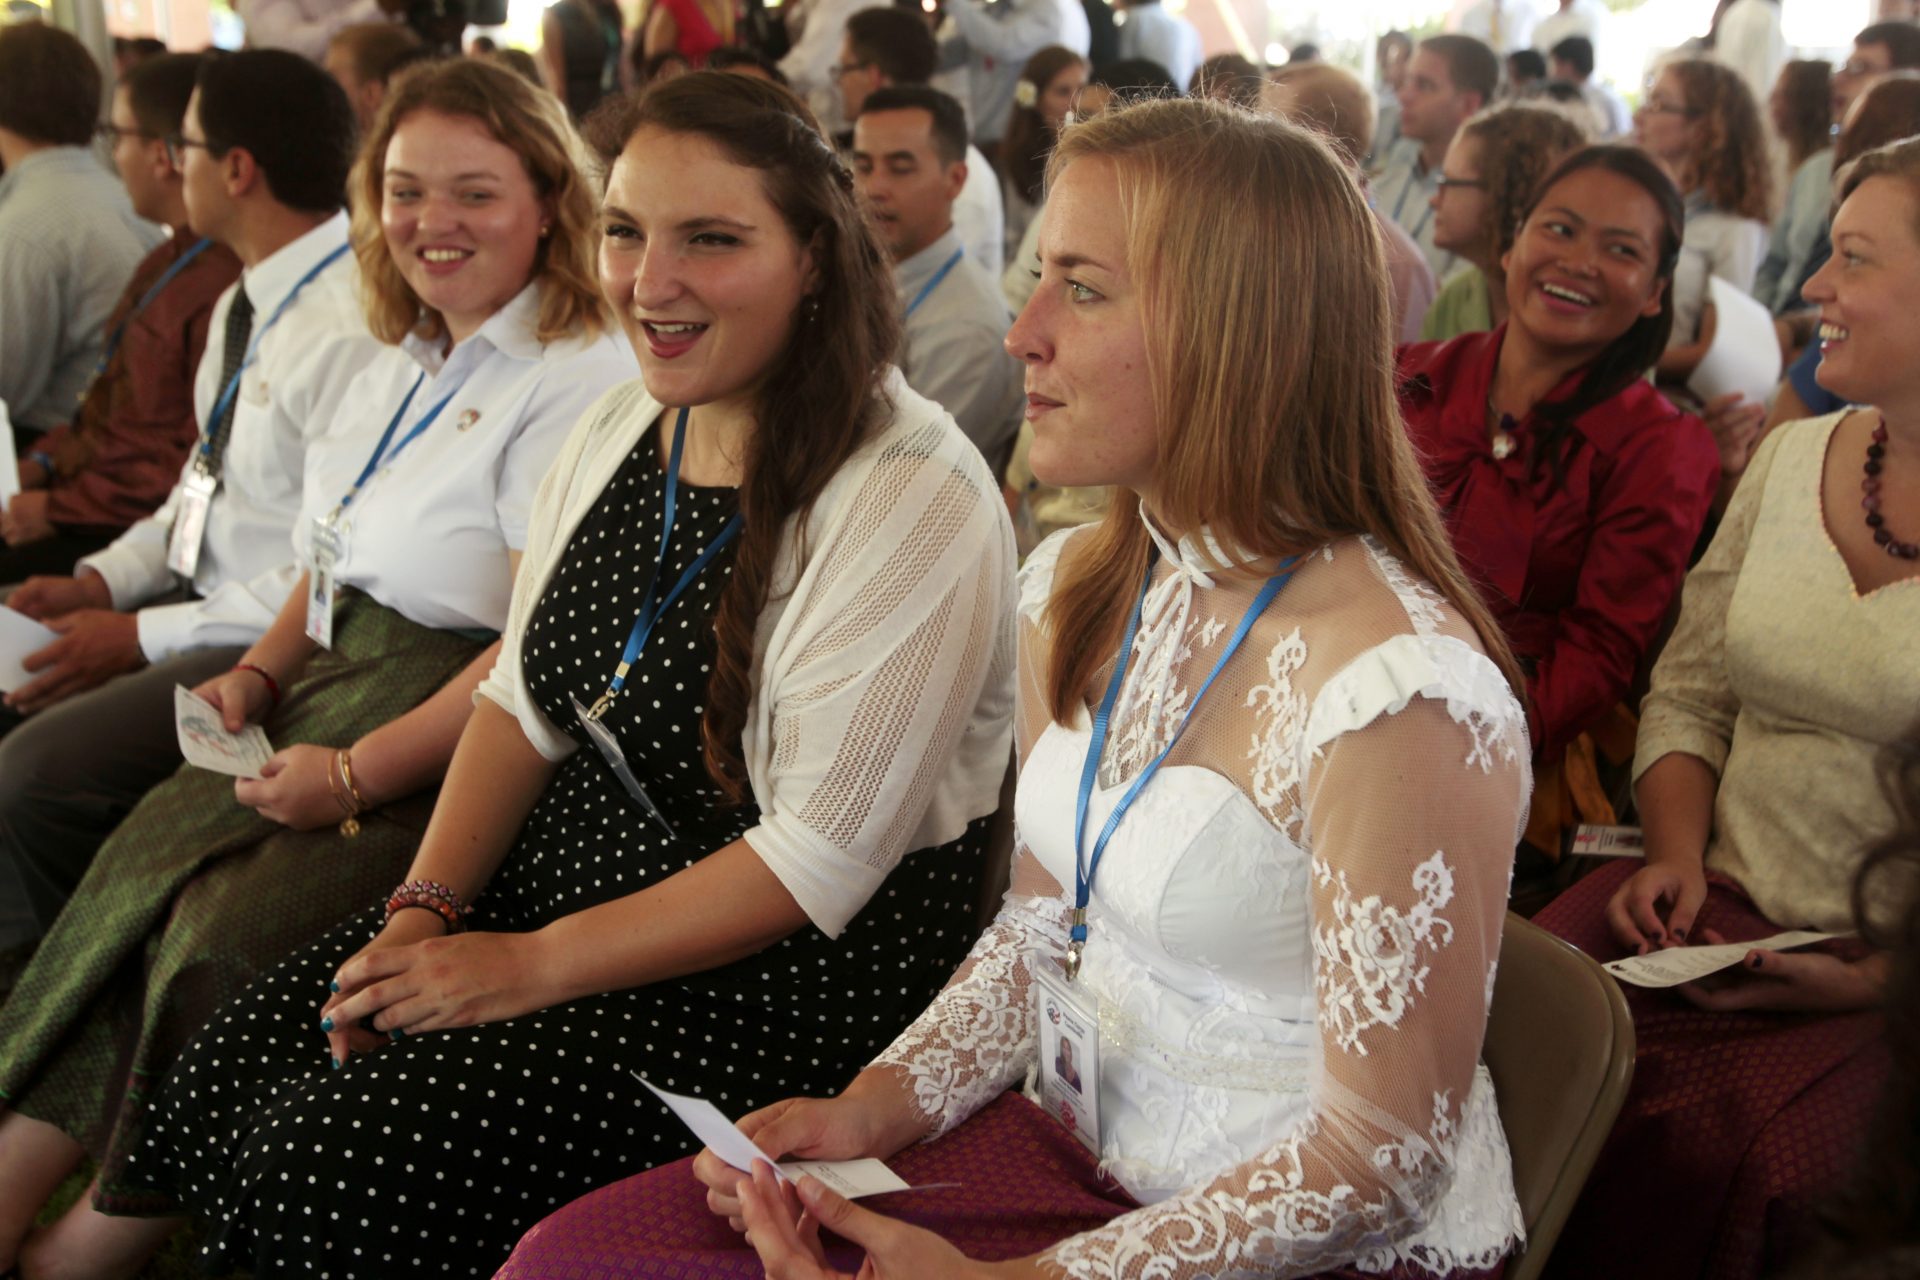 U.S. Peace Corps volunteers attend the swears in ceremony in U.S. Embassy to Cambodia, in Phnom Penh, Cambodia, Friday, Sept. 25, 2015 as they mark official start of the corps volunteer program in this impoverished Southeast Asian nation. Hundreds of Peace Corps volunteers have served in at least 17 provinces throughout Cambodia since 2007.